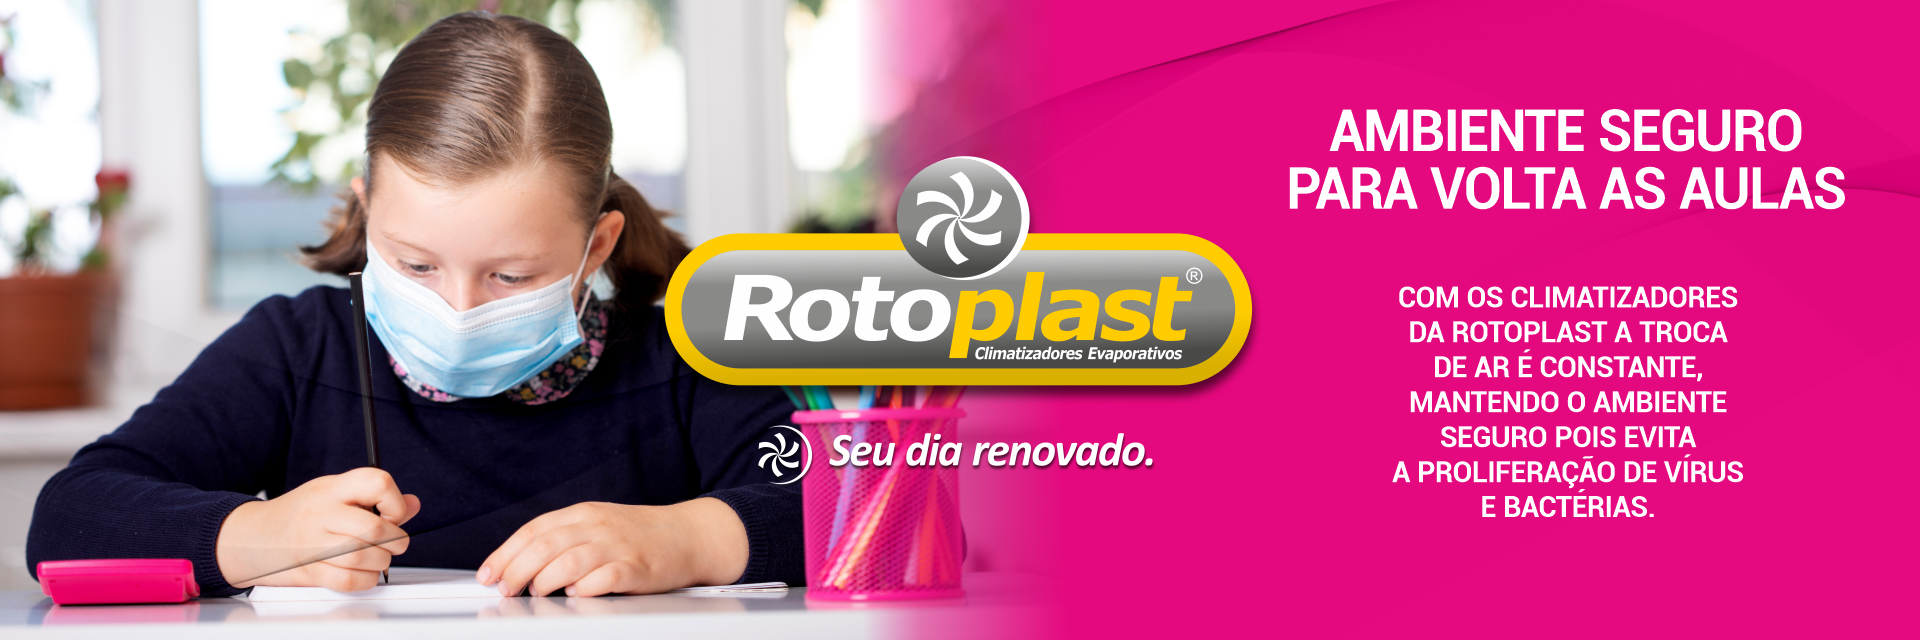 ROTOPLAST_BANNER-DIFERENCIAIS-1920x640